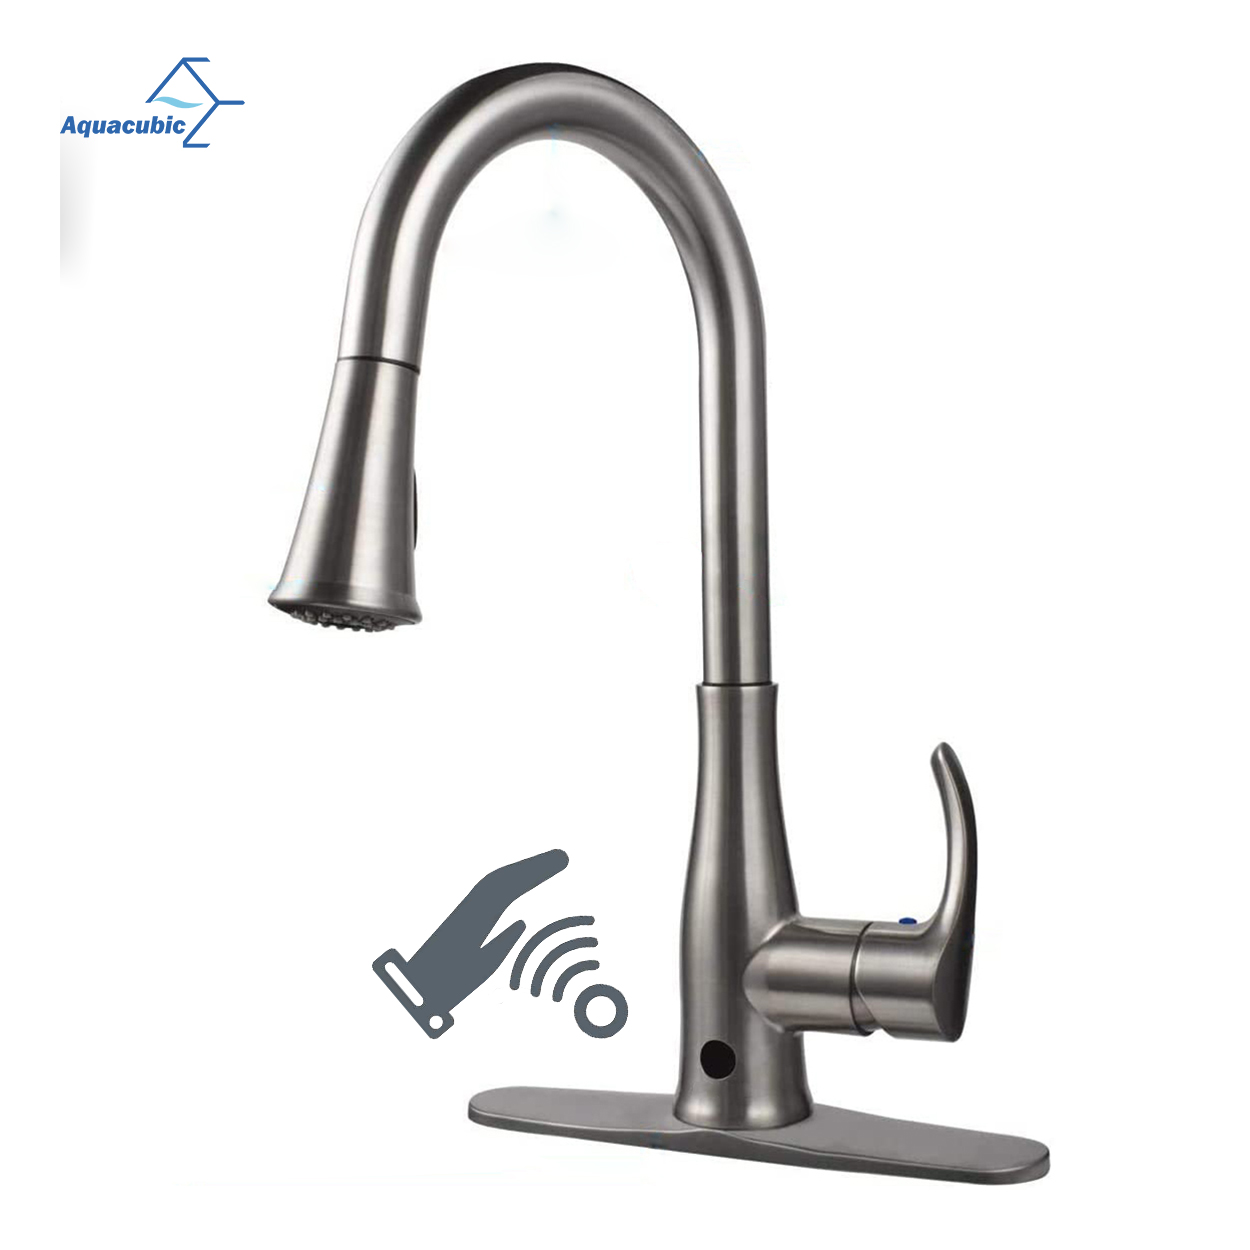 Aquacubic cUPC Sensor Infrared Smart Touchless Hand Free Two Motion Pull Down Kitchen Sink Faucet